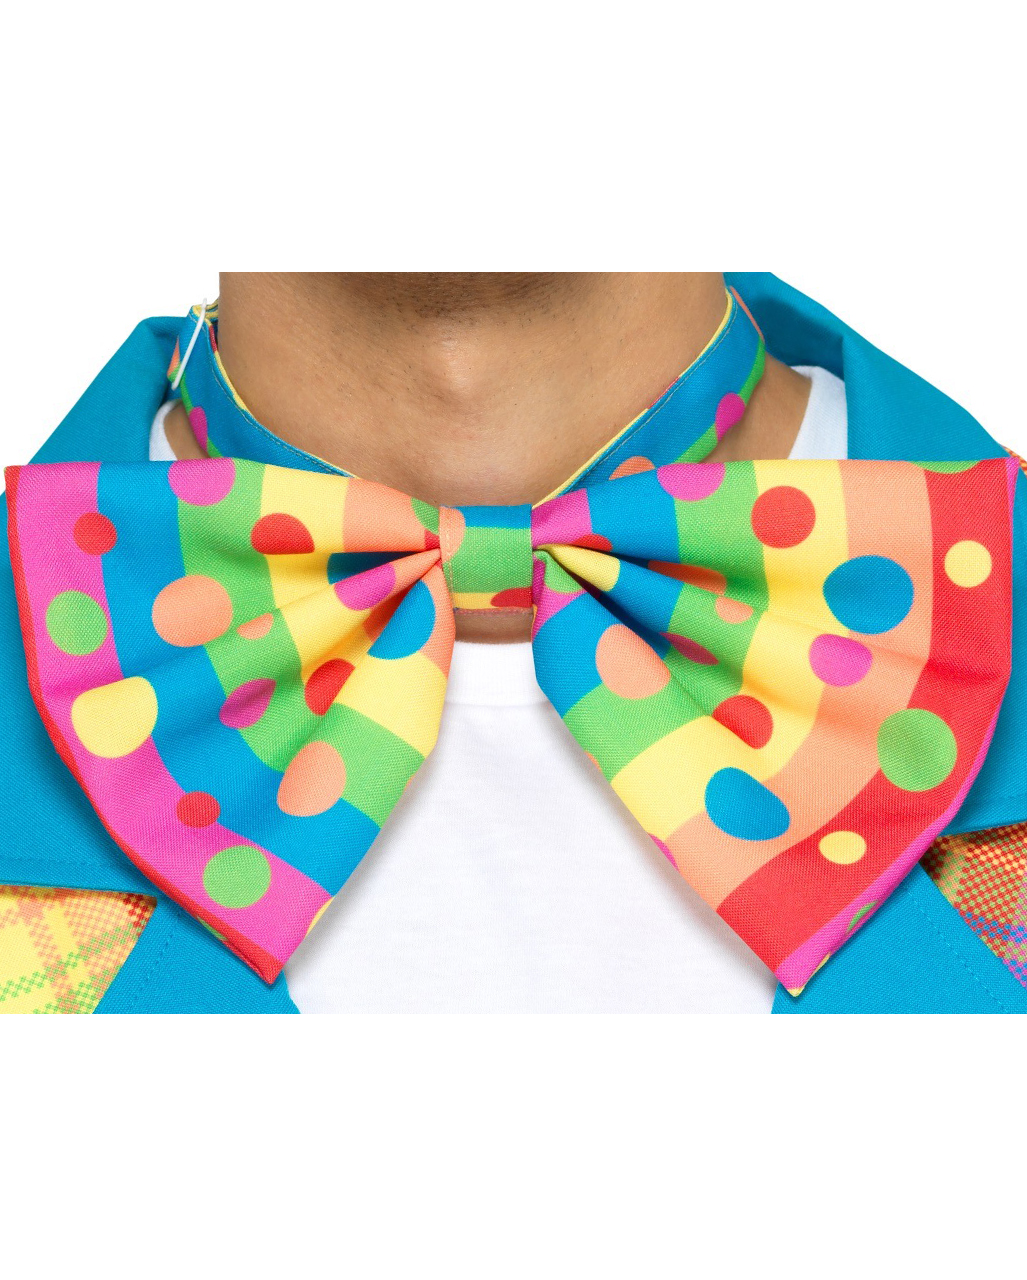 Big Red Clown Bow Tie For Fancy Dress Party Accessory